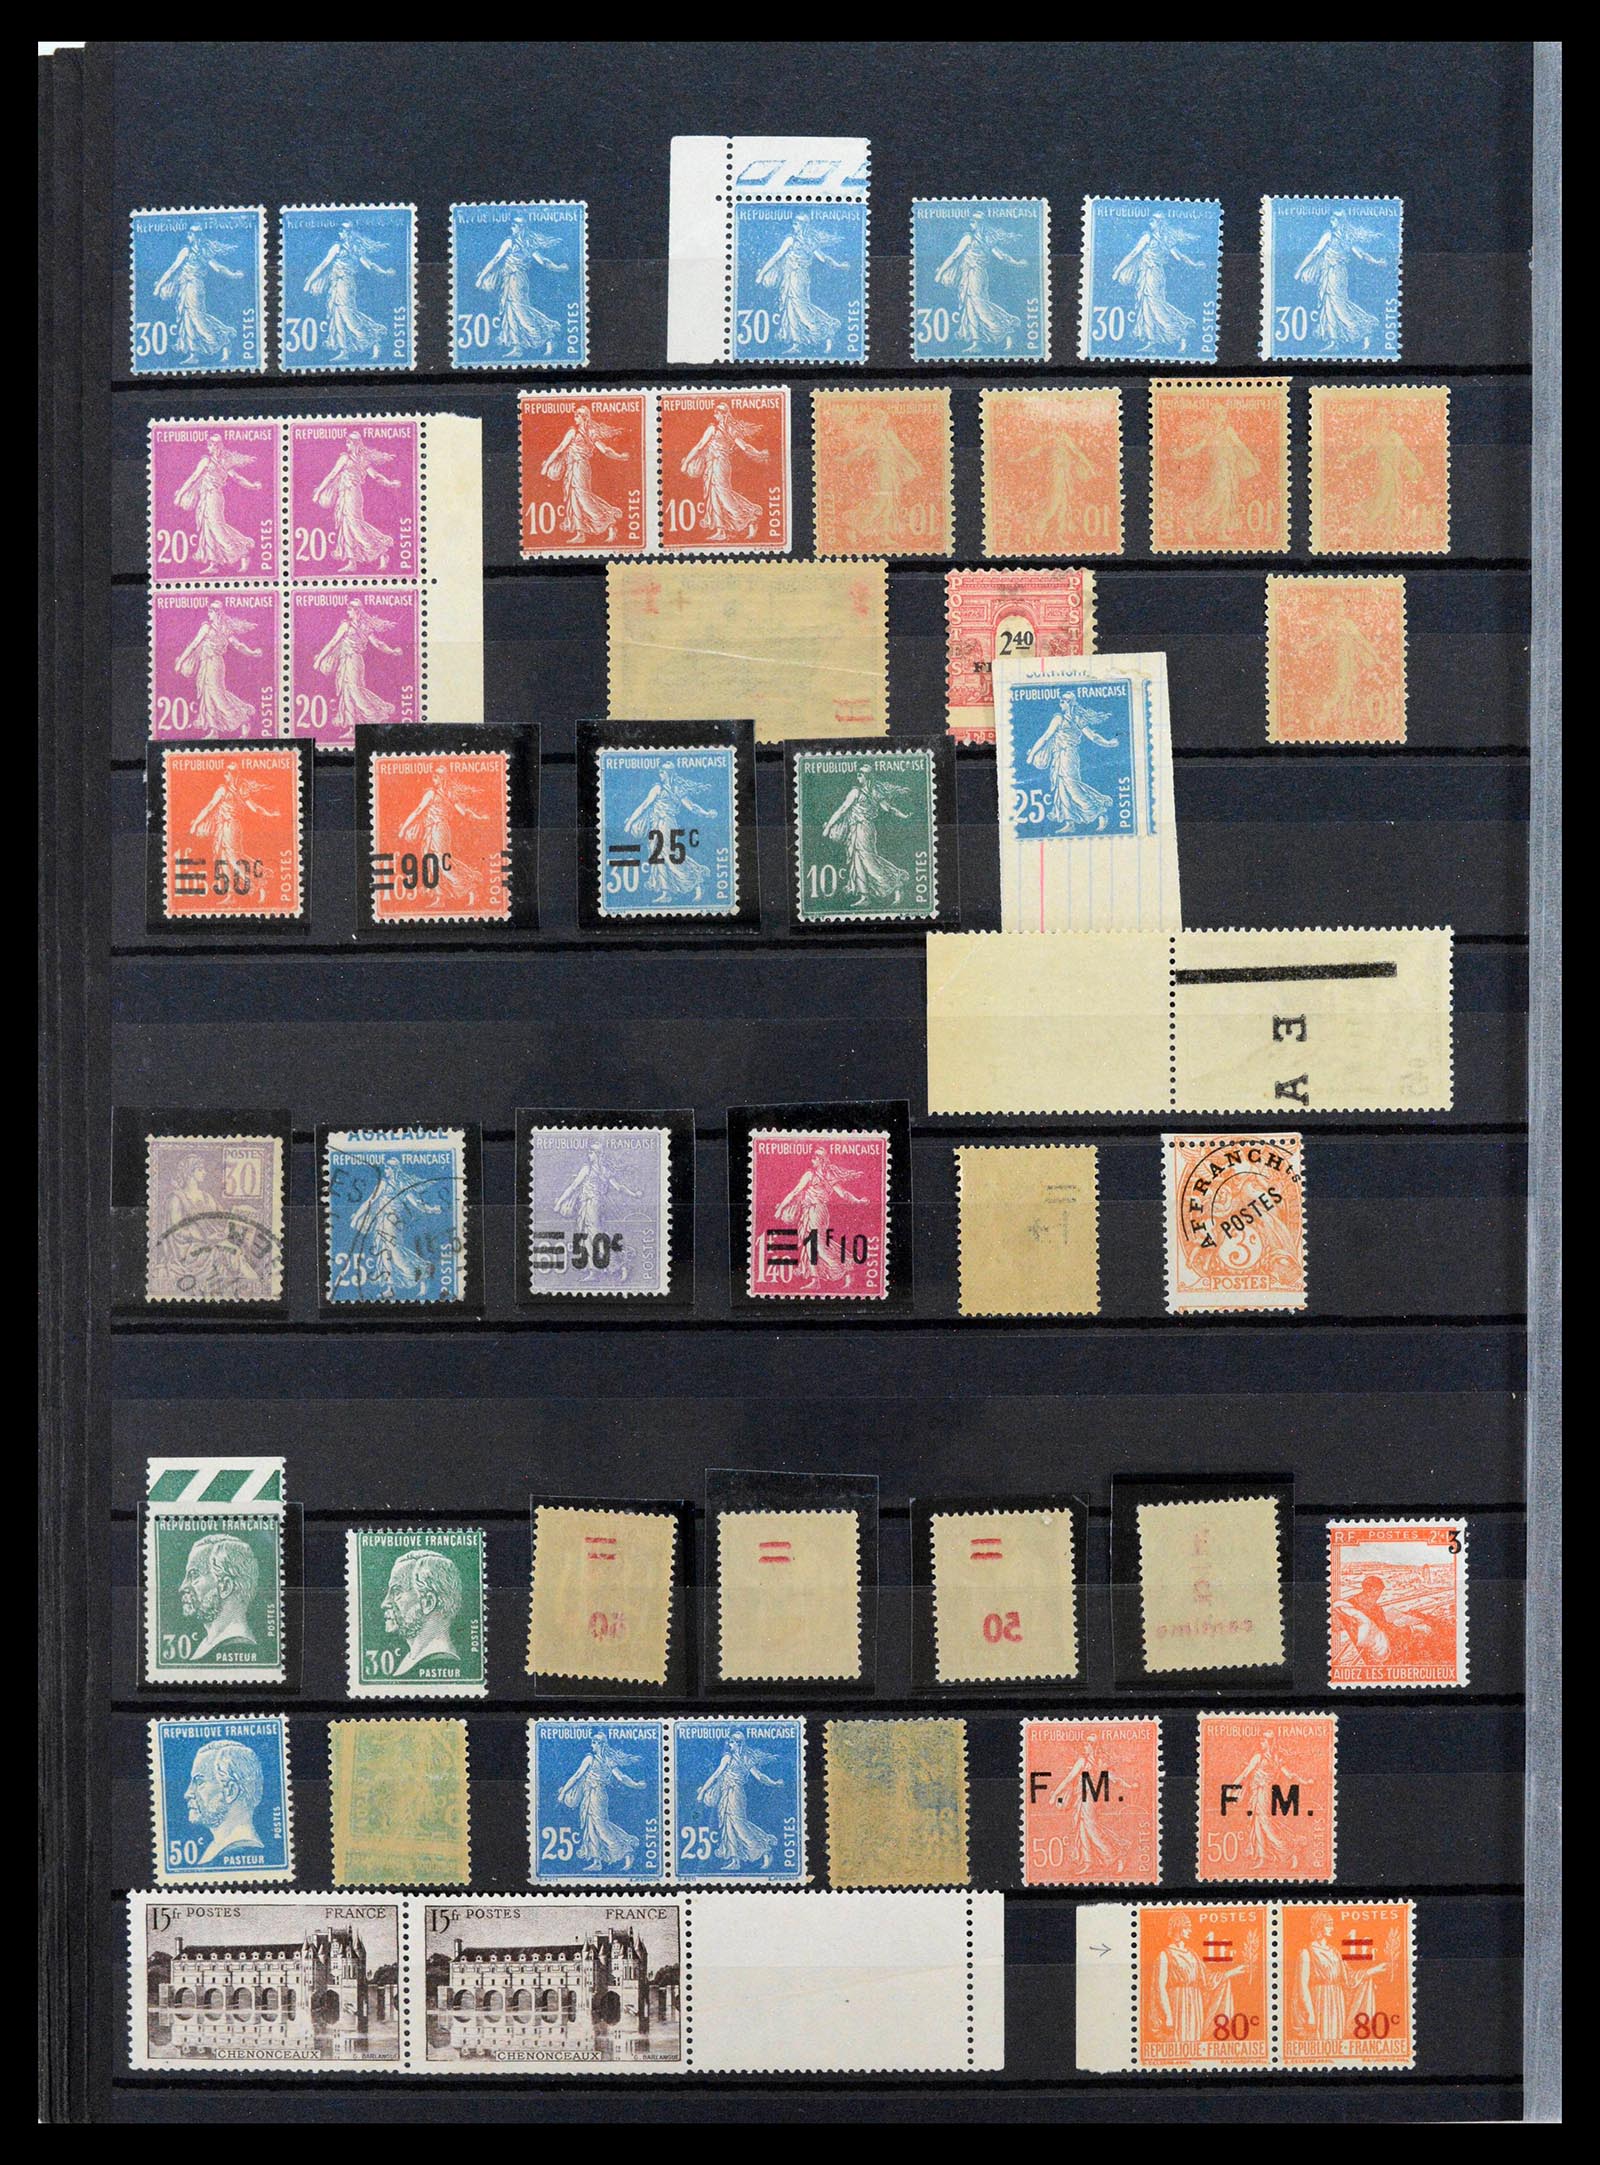 39423 0044 - Stamp collection 39423 France varieties 1862-1985.